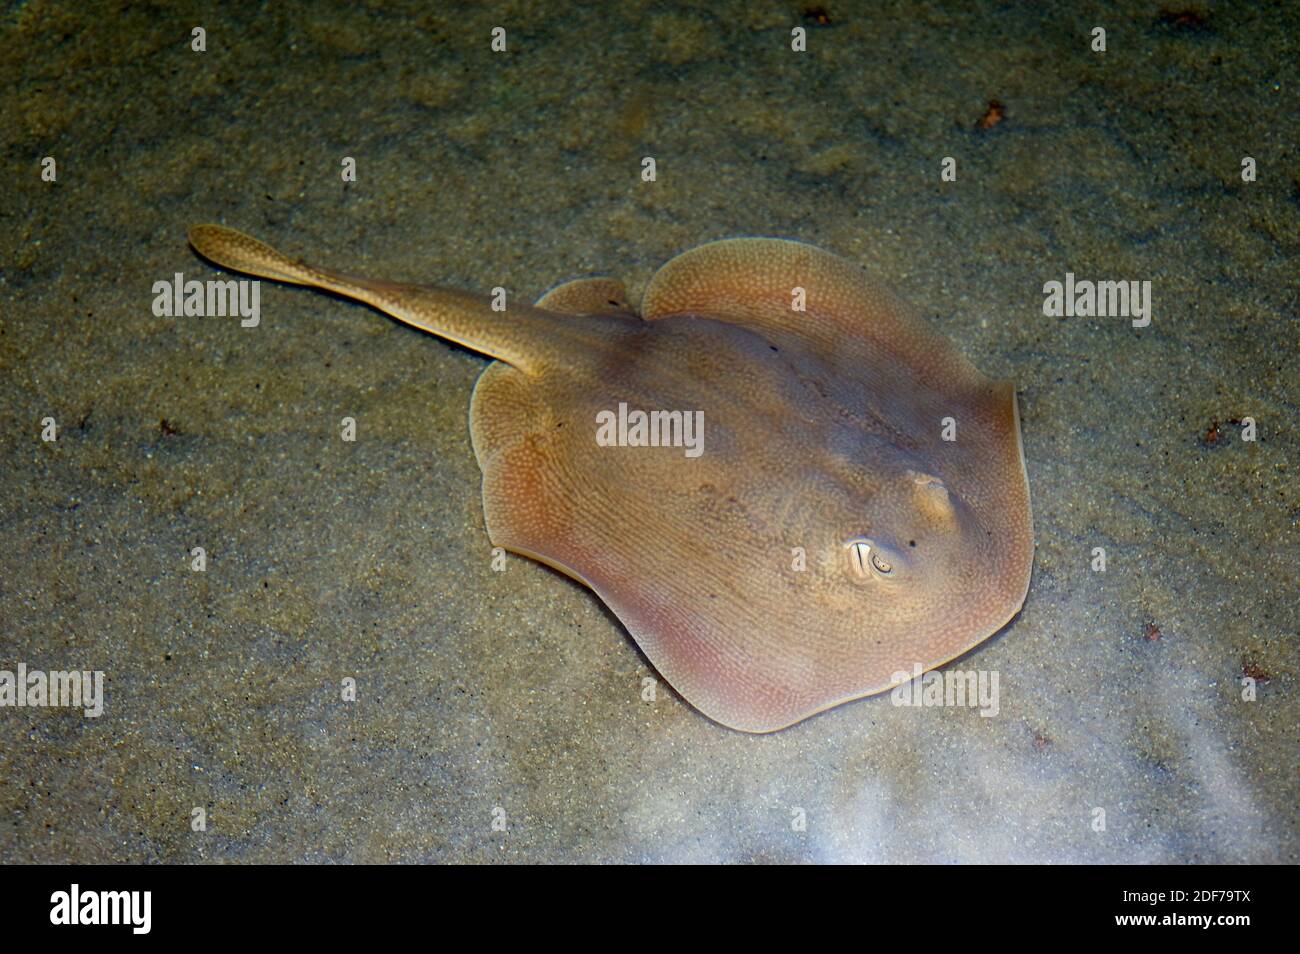 Marbled electric ray (Torpedo marmorata) is an electric ray native to eastern Atlantic Ocean and Mediterranean Sea. Stock Photo